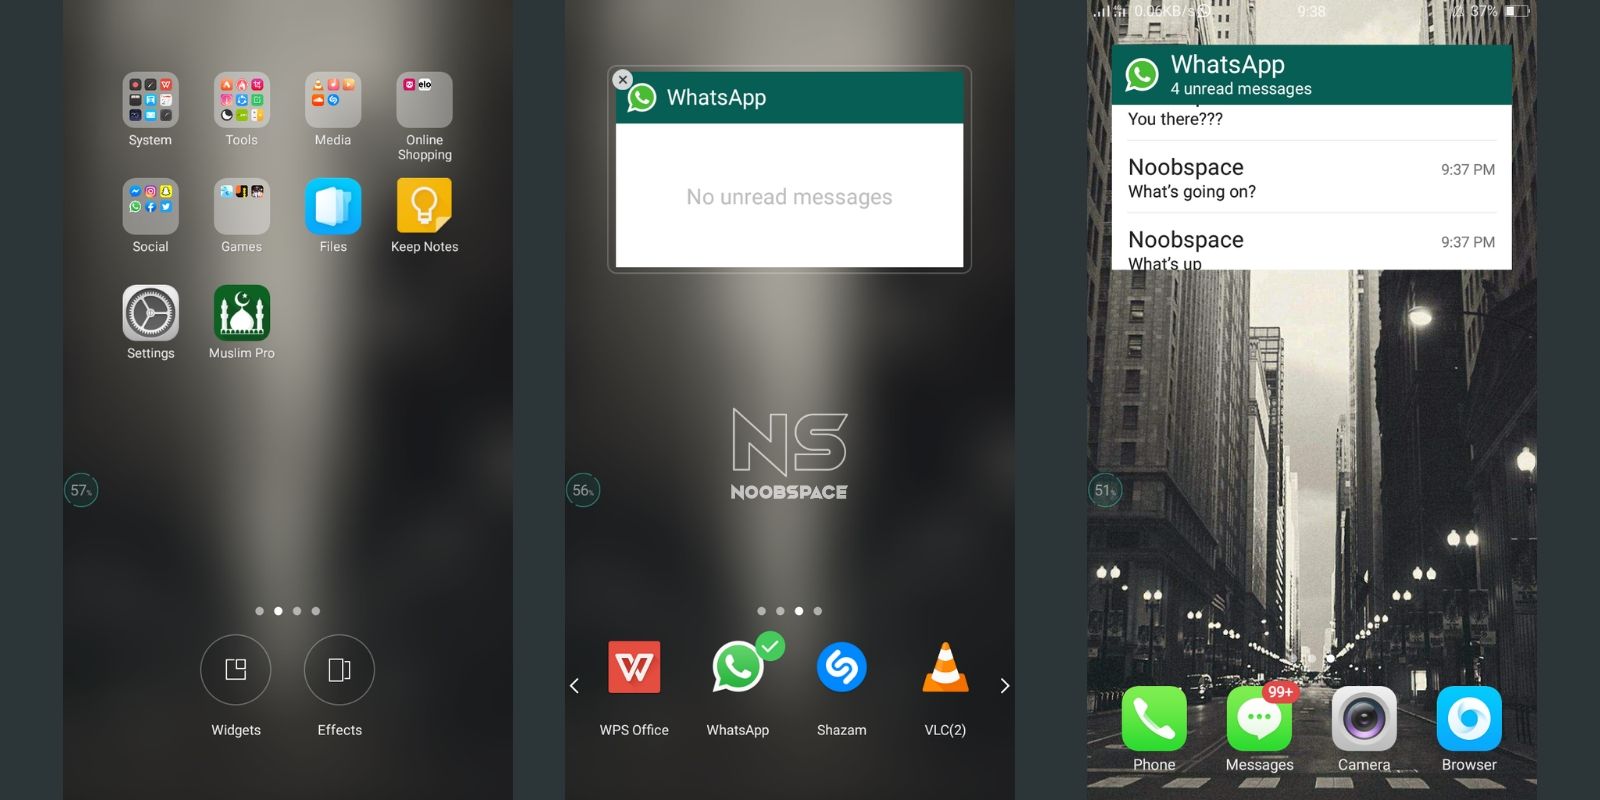 Adding WhatsApp Widgets to the home screen for quick access